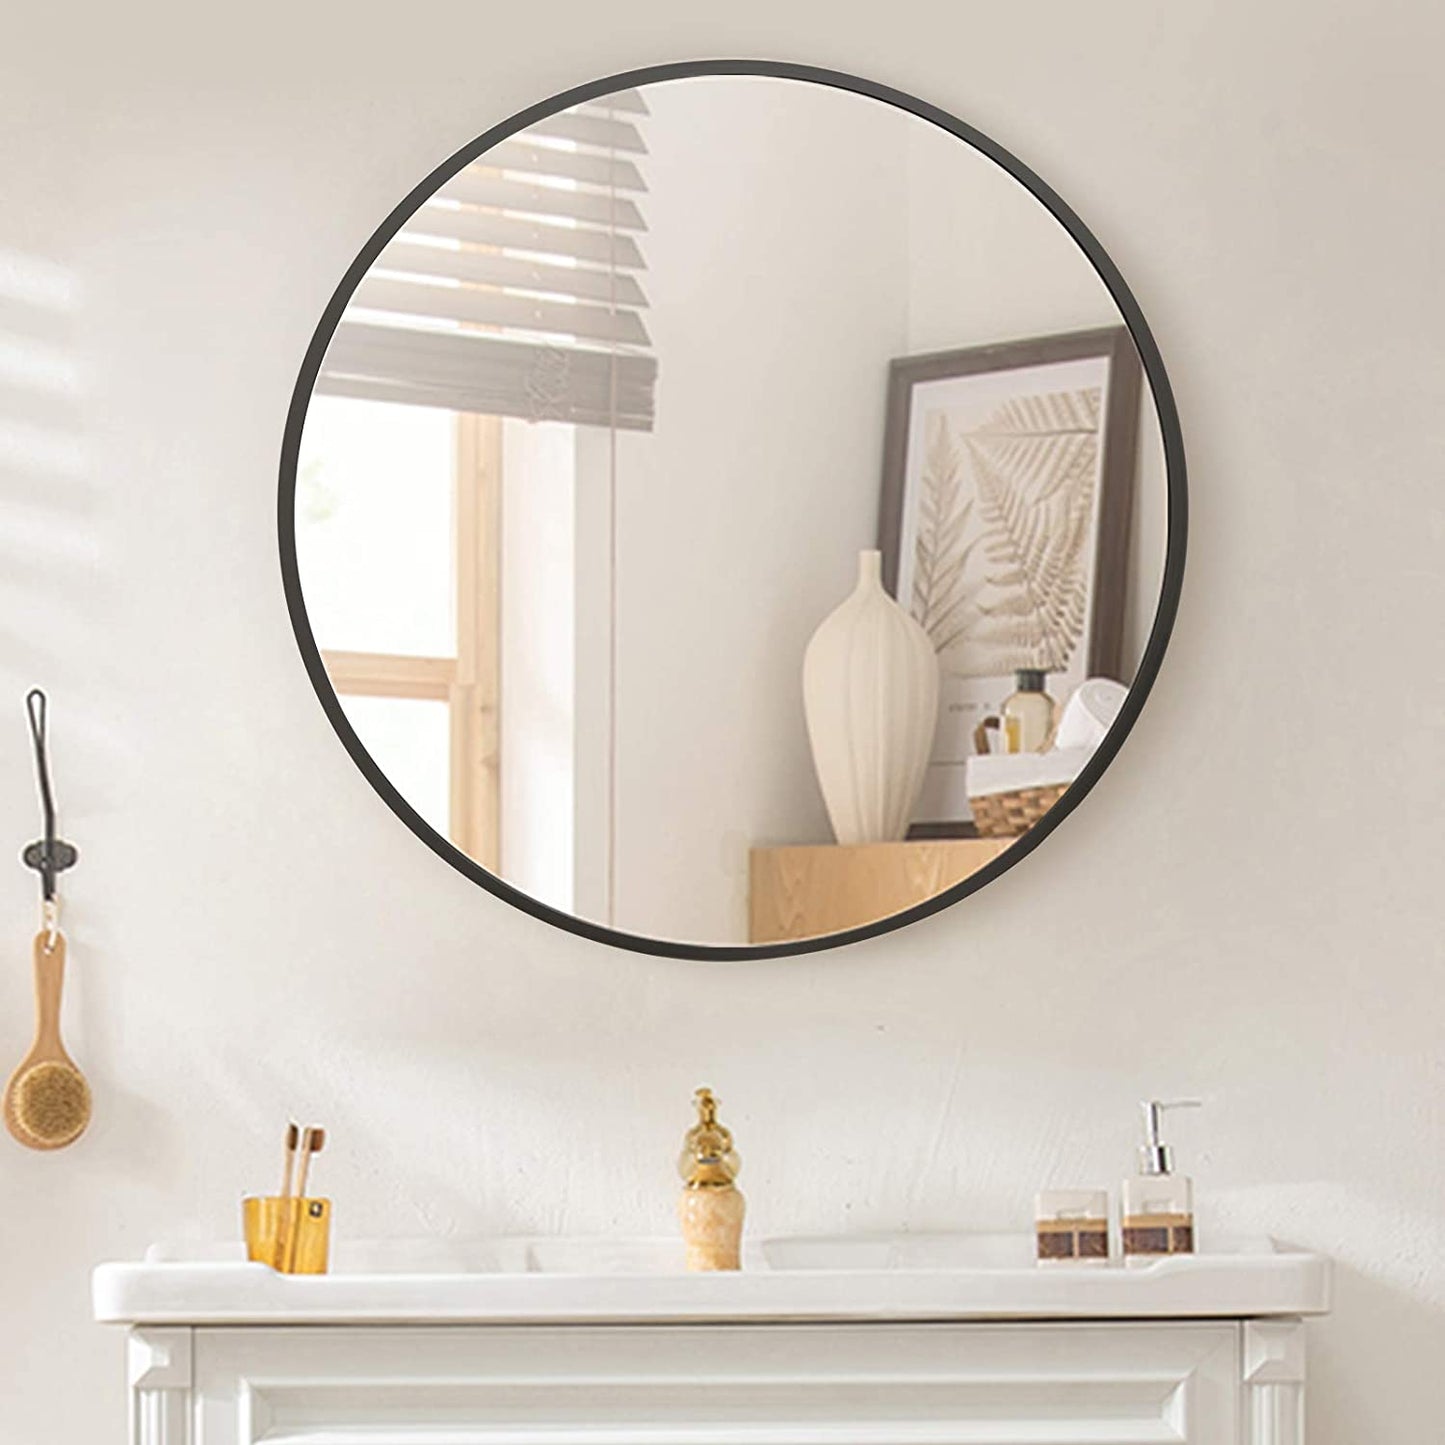 Round Wall Mirrors for Home decor|36 inch Large| Black & Gold color available